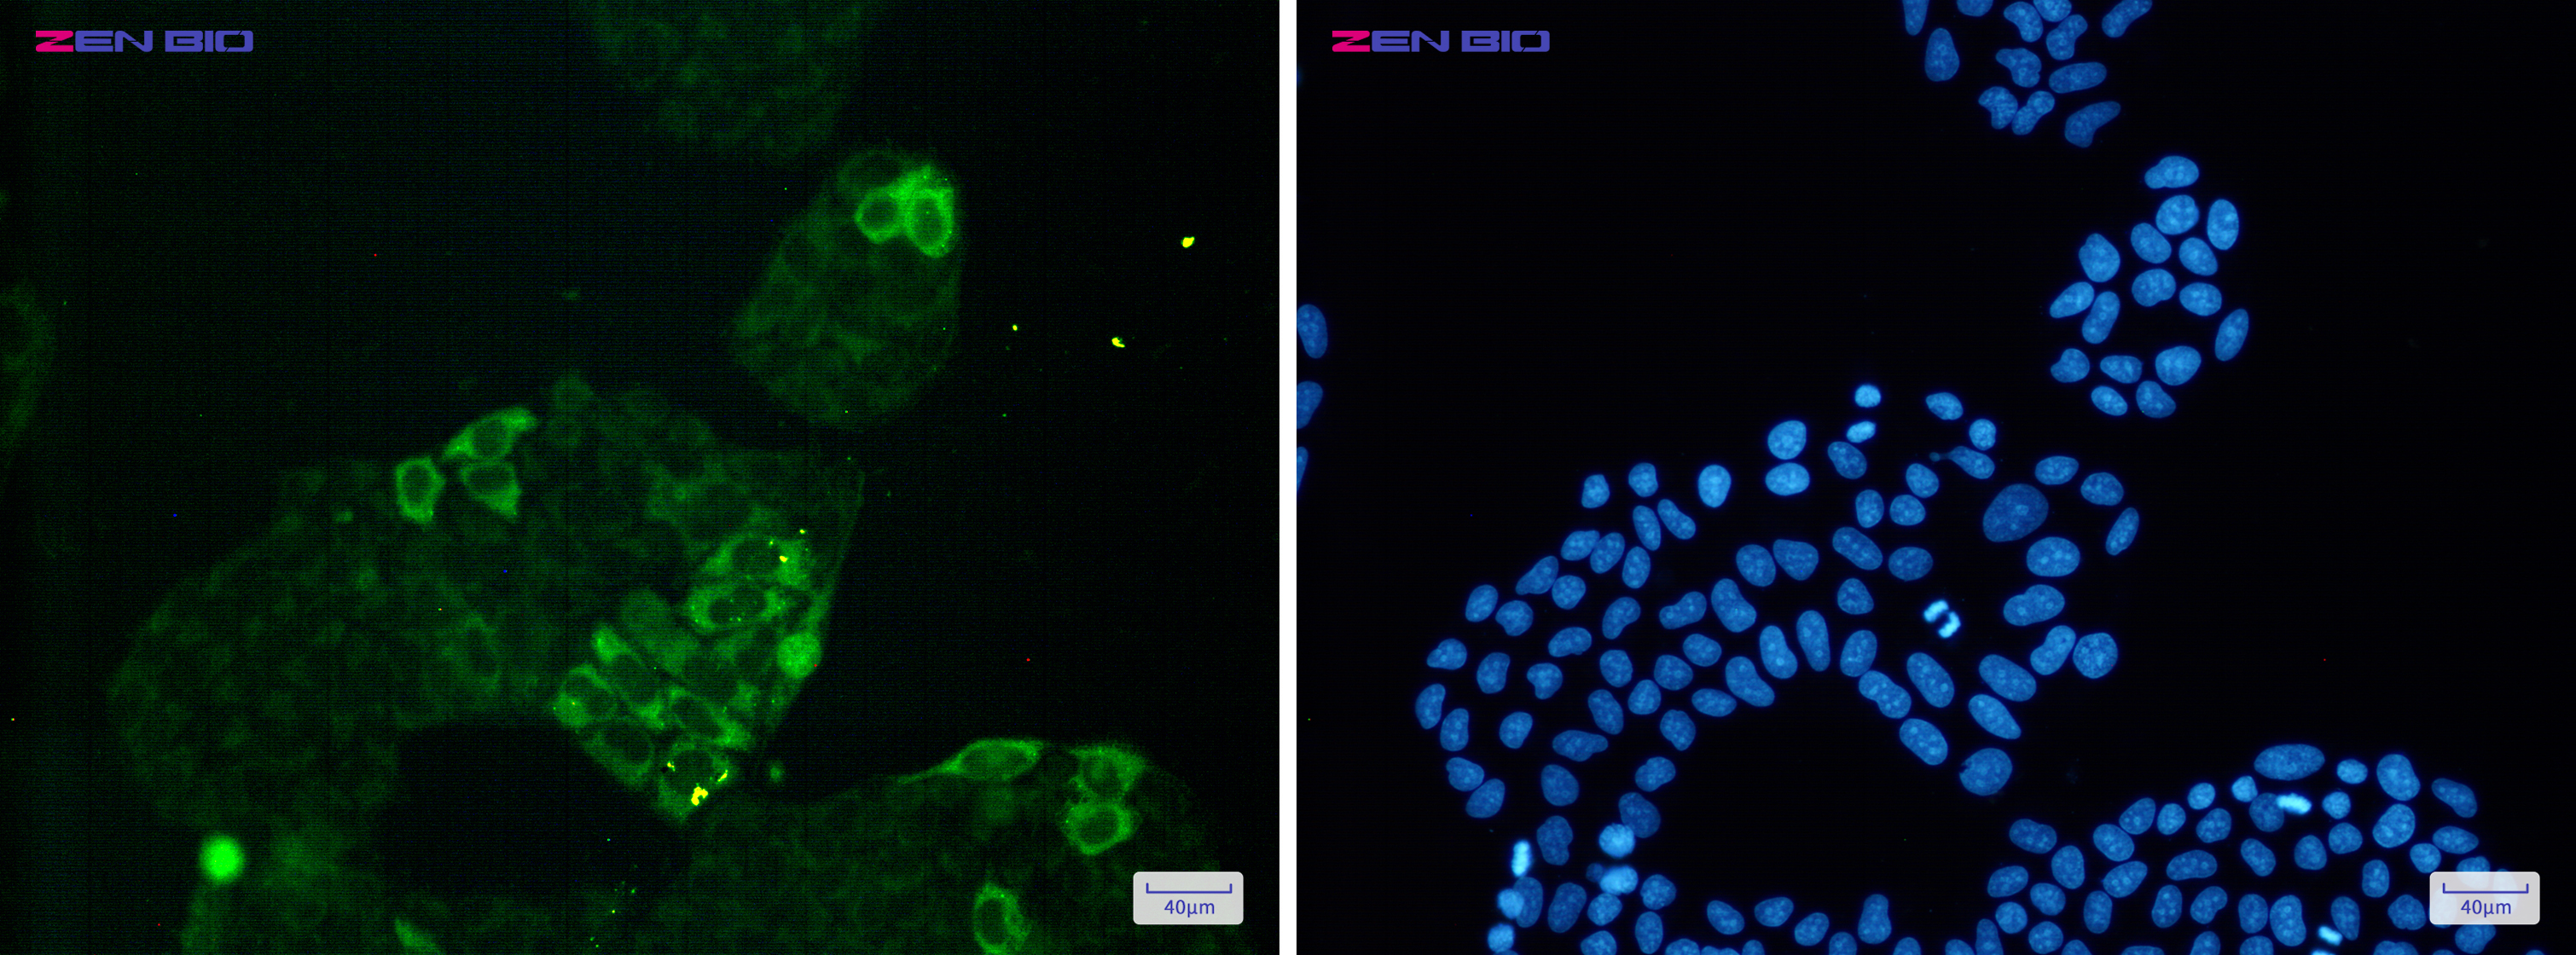 Immunocytochemistry of Cyclin B1(green) in Hela cells using Cyclin B1 Rabbit pAb at dilution 1/50, and DAPI(blue)